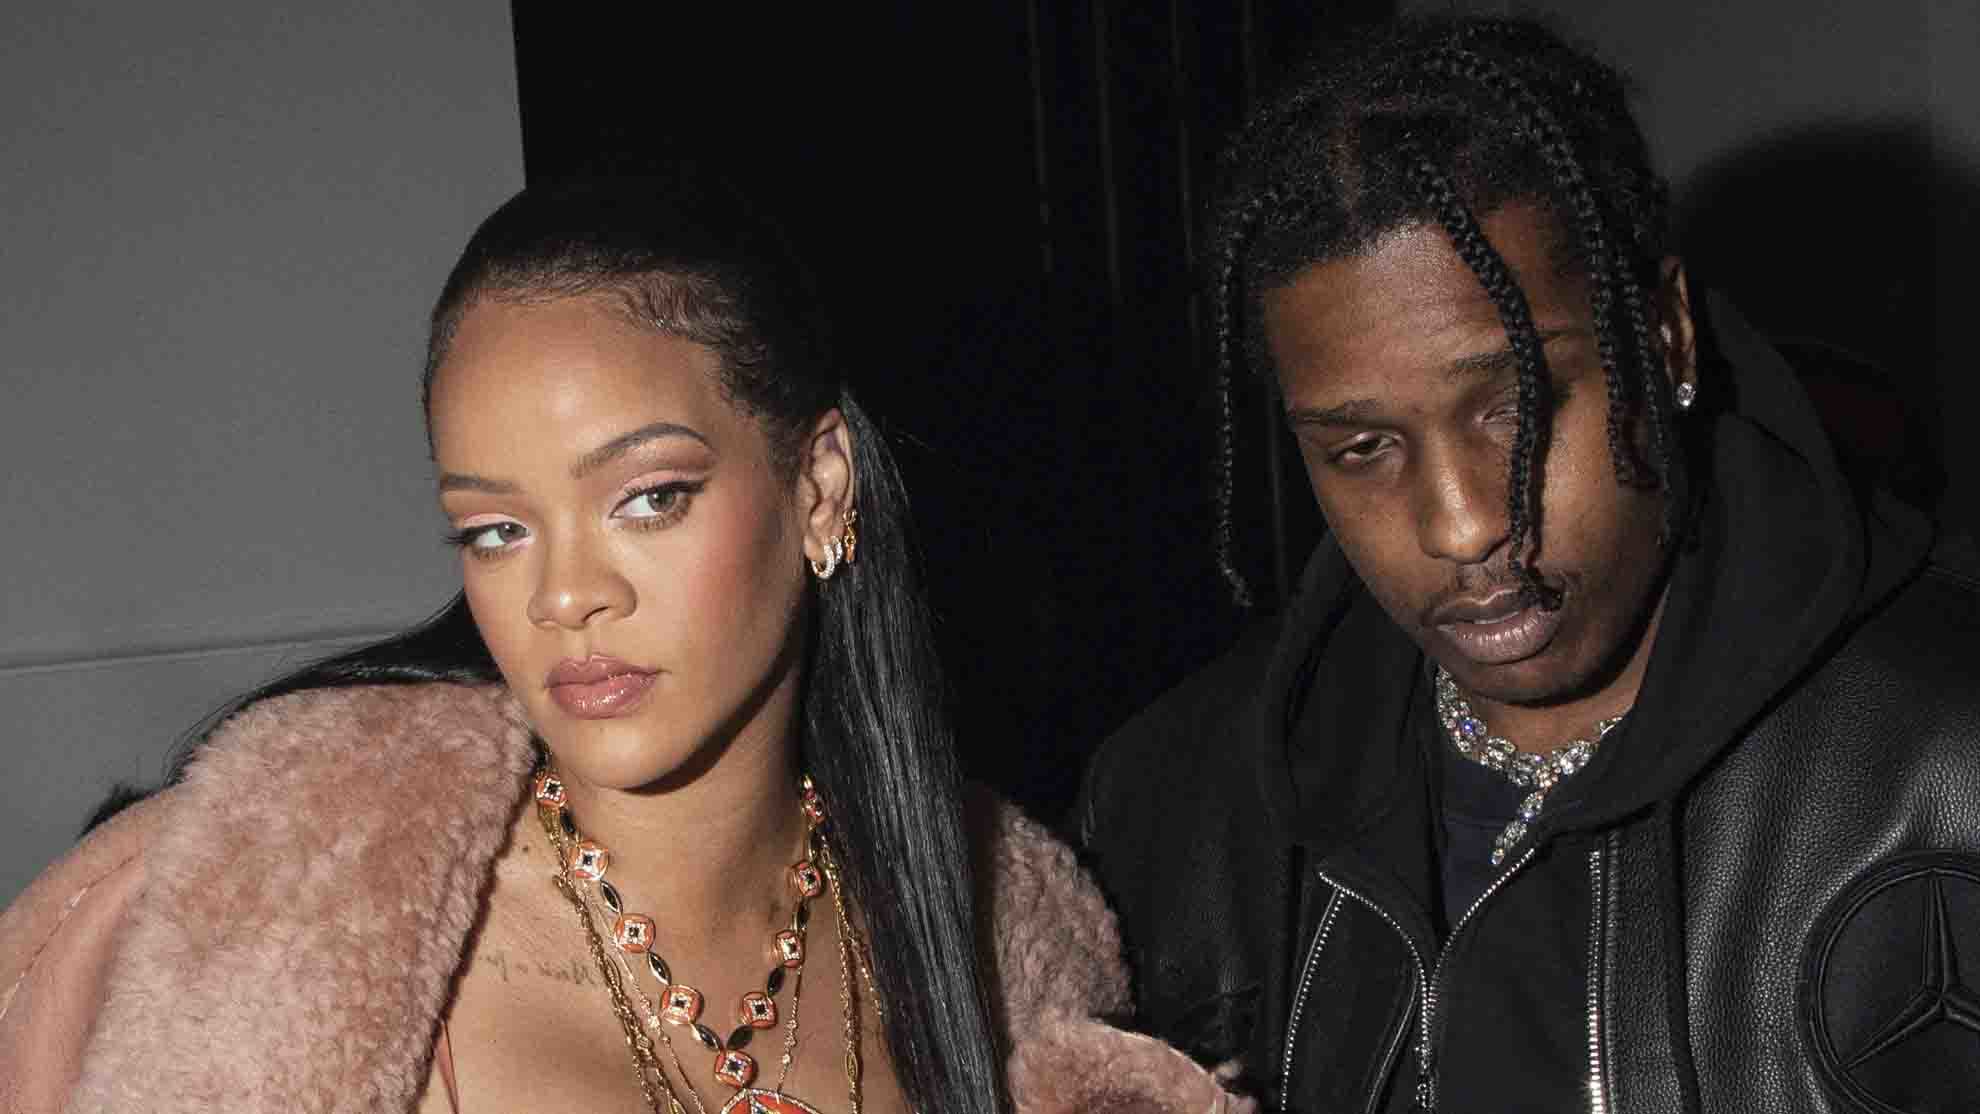 Who is Rihanna dating?